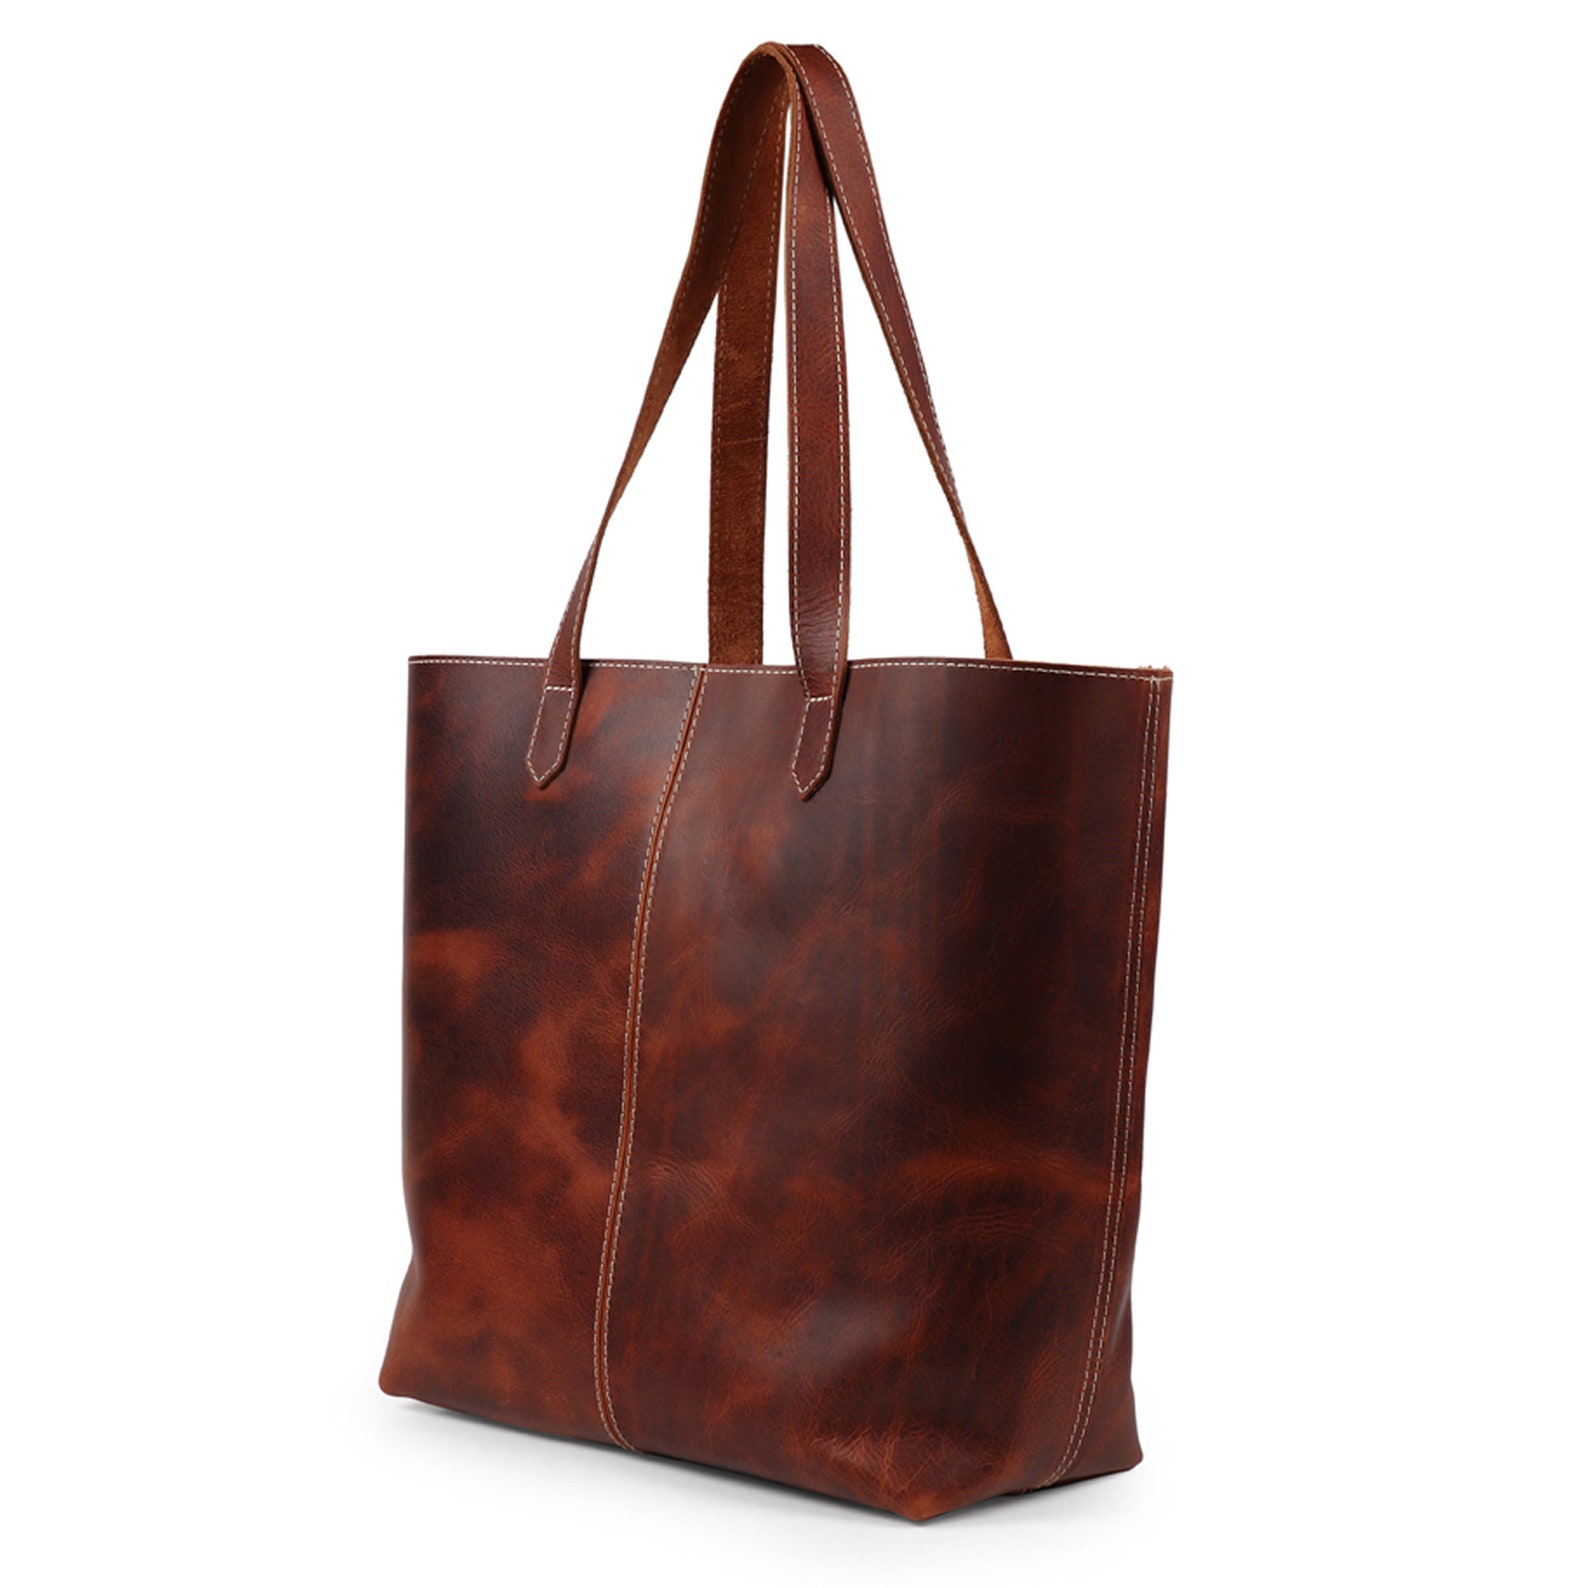 Pismo Leather Tote Bag Handcrafted Durable High Quality - Etsy